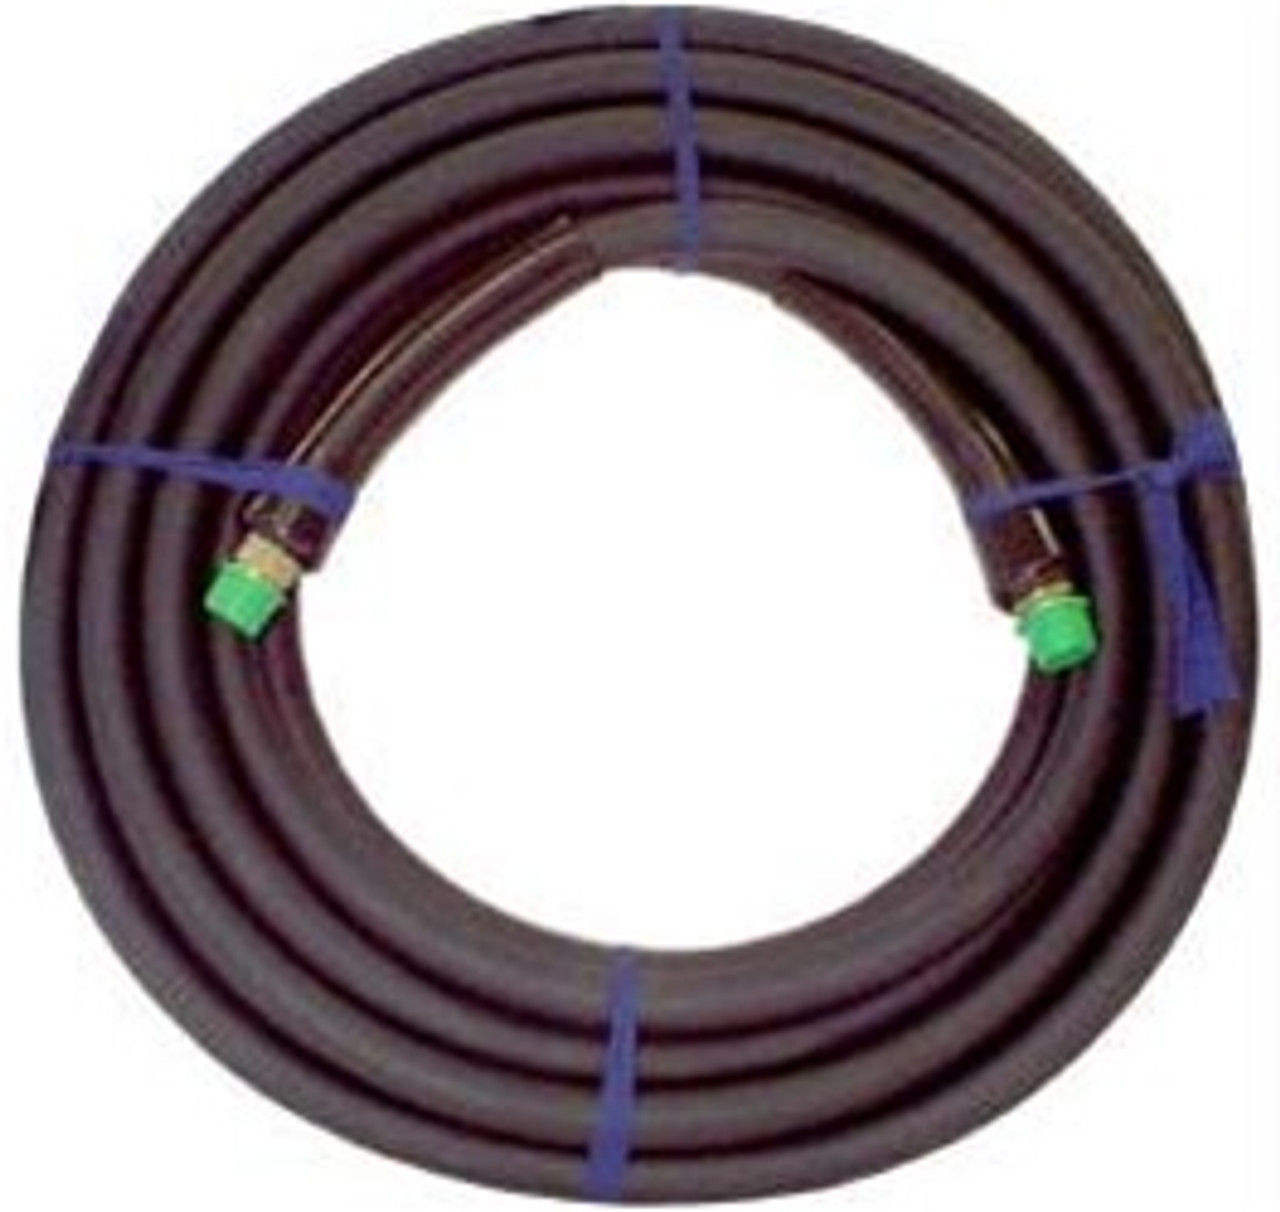 Steam Jenny JD7624 3/8" Id X 50' Combo Pressure Washer/Steam Cleaner Hose